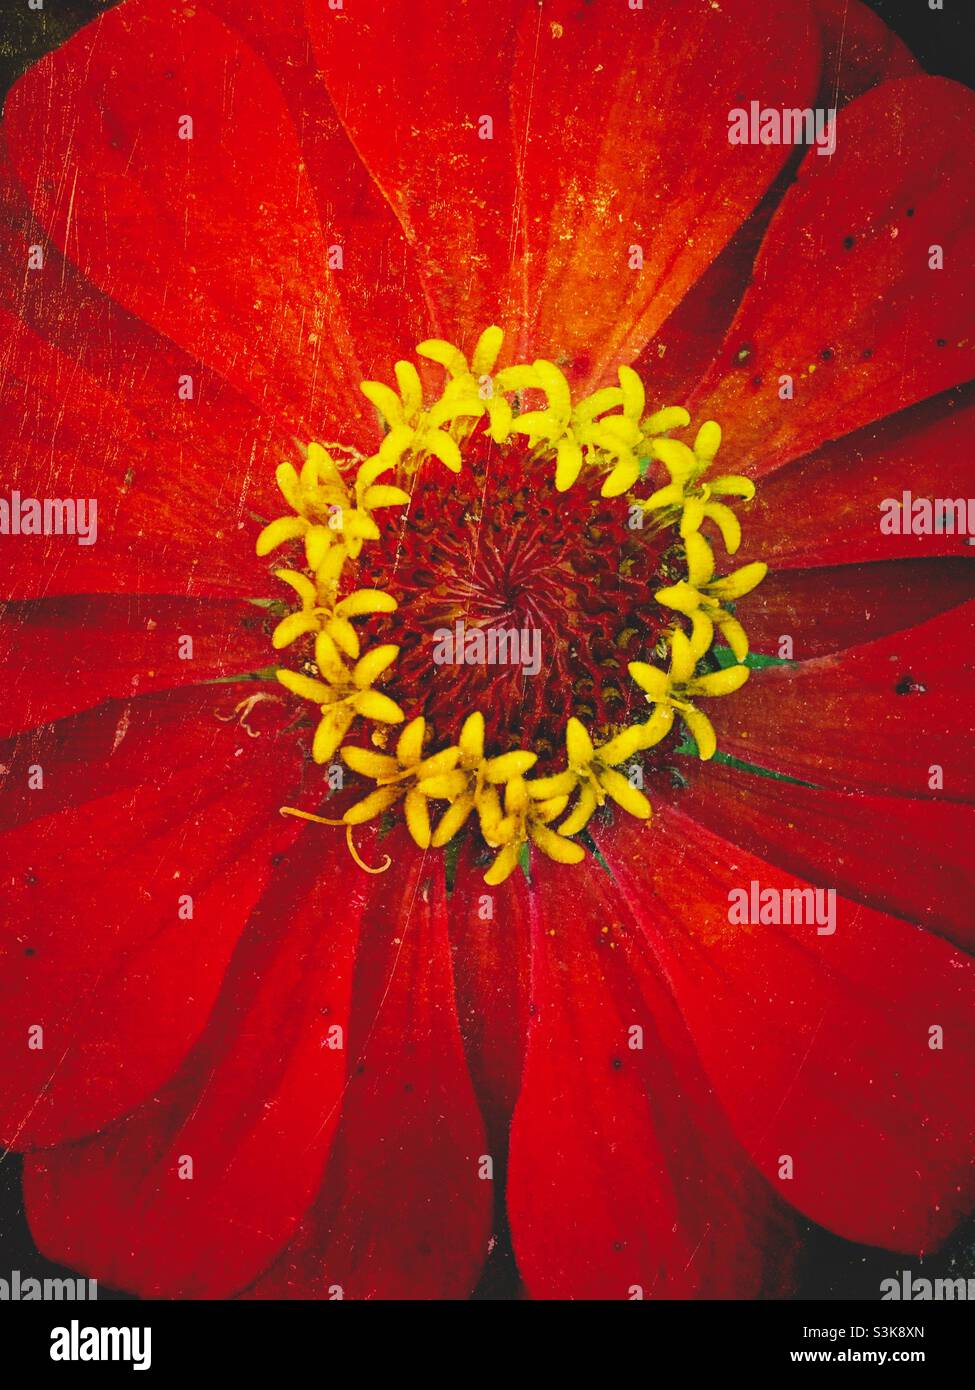 Zinnia flower blossom with textured effects. Stock Photo